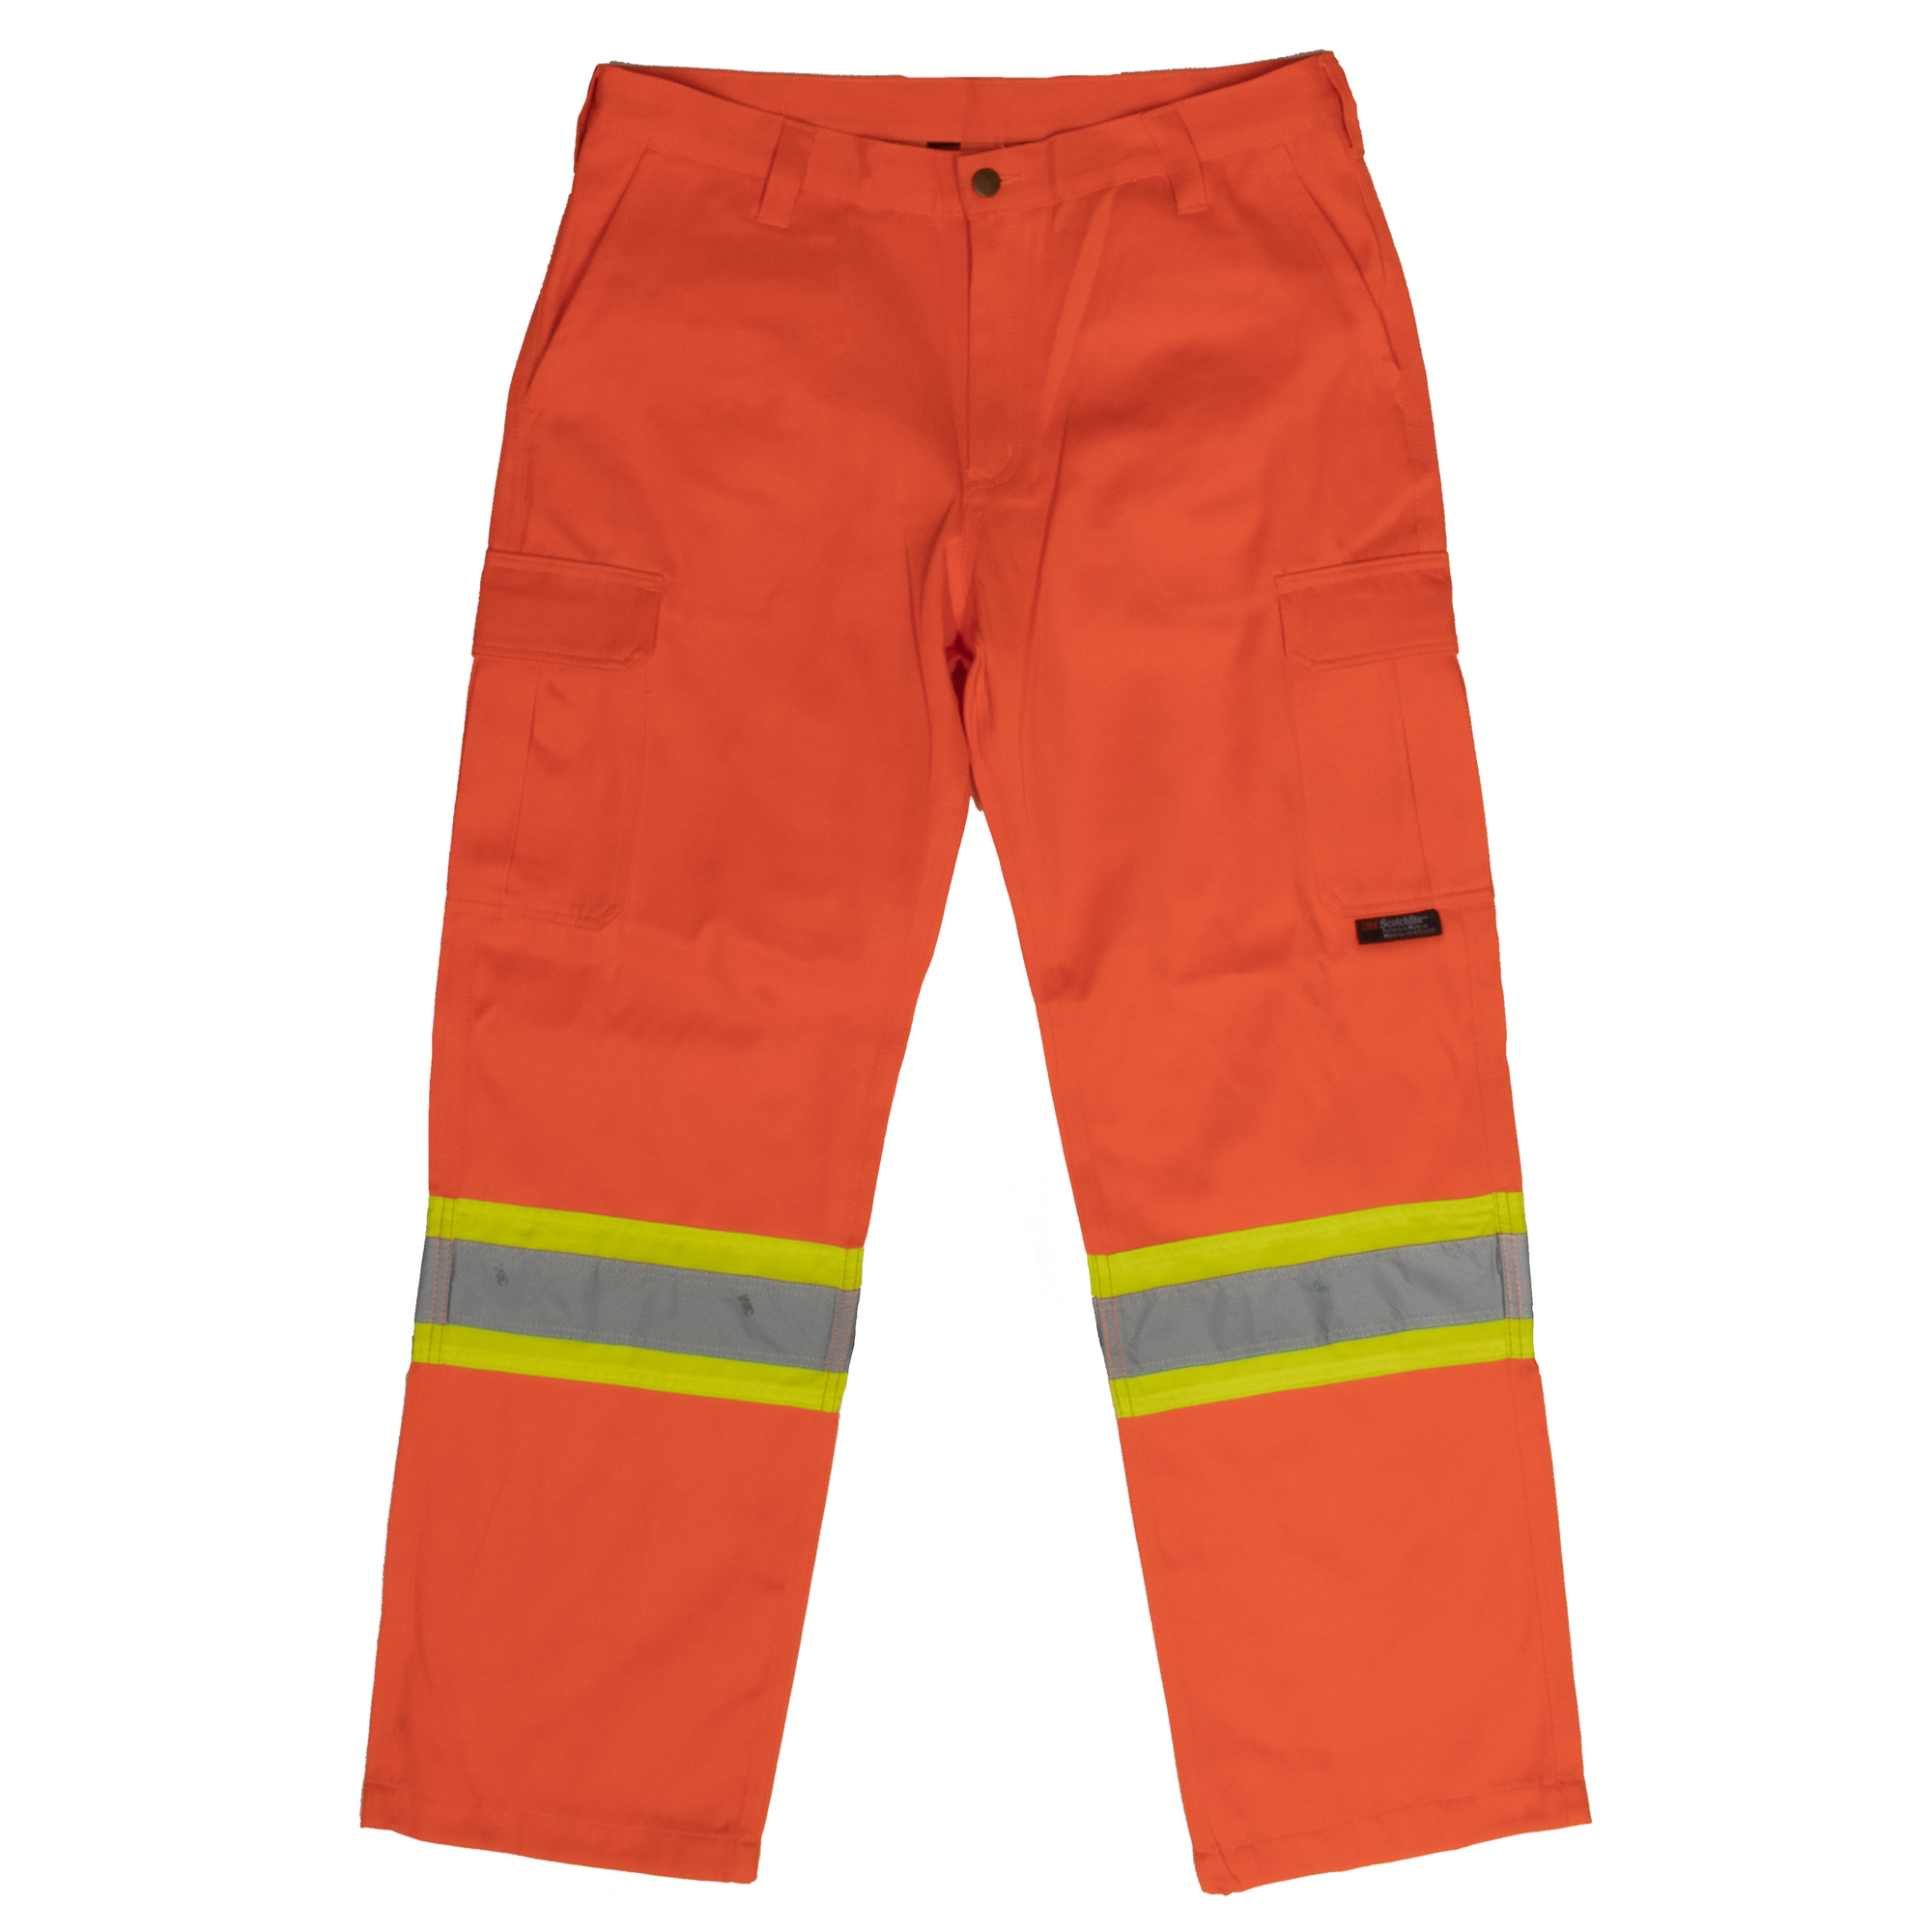 Tough Duck, Safety Cargo Work Pant, Waist 42 in, Inseam 30 in, Color Fluorescent Orange, Model SP010